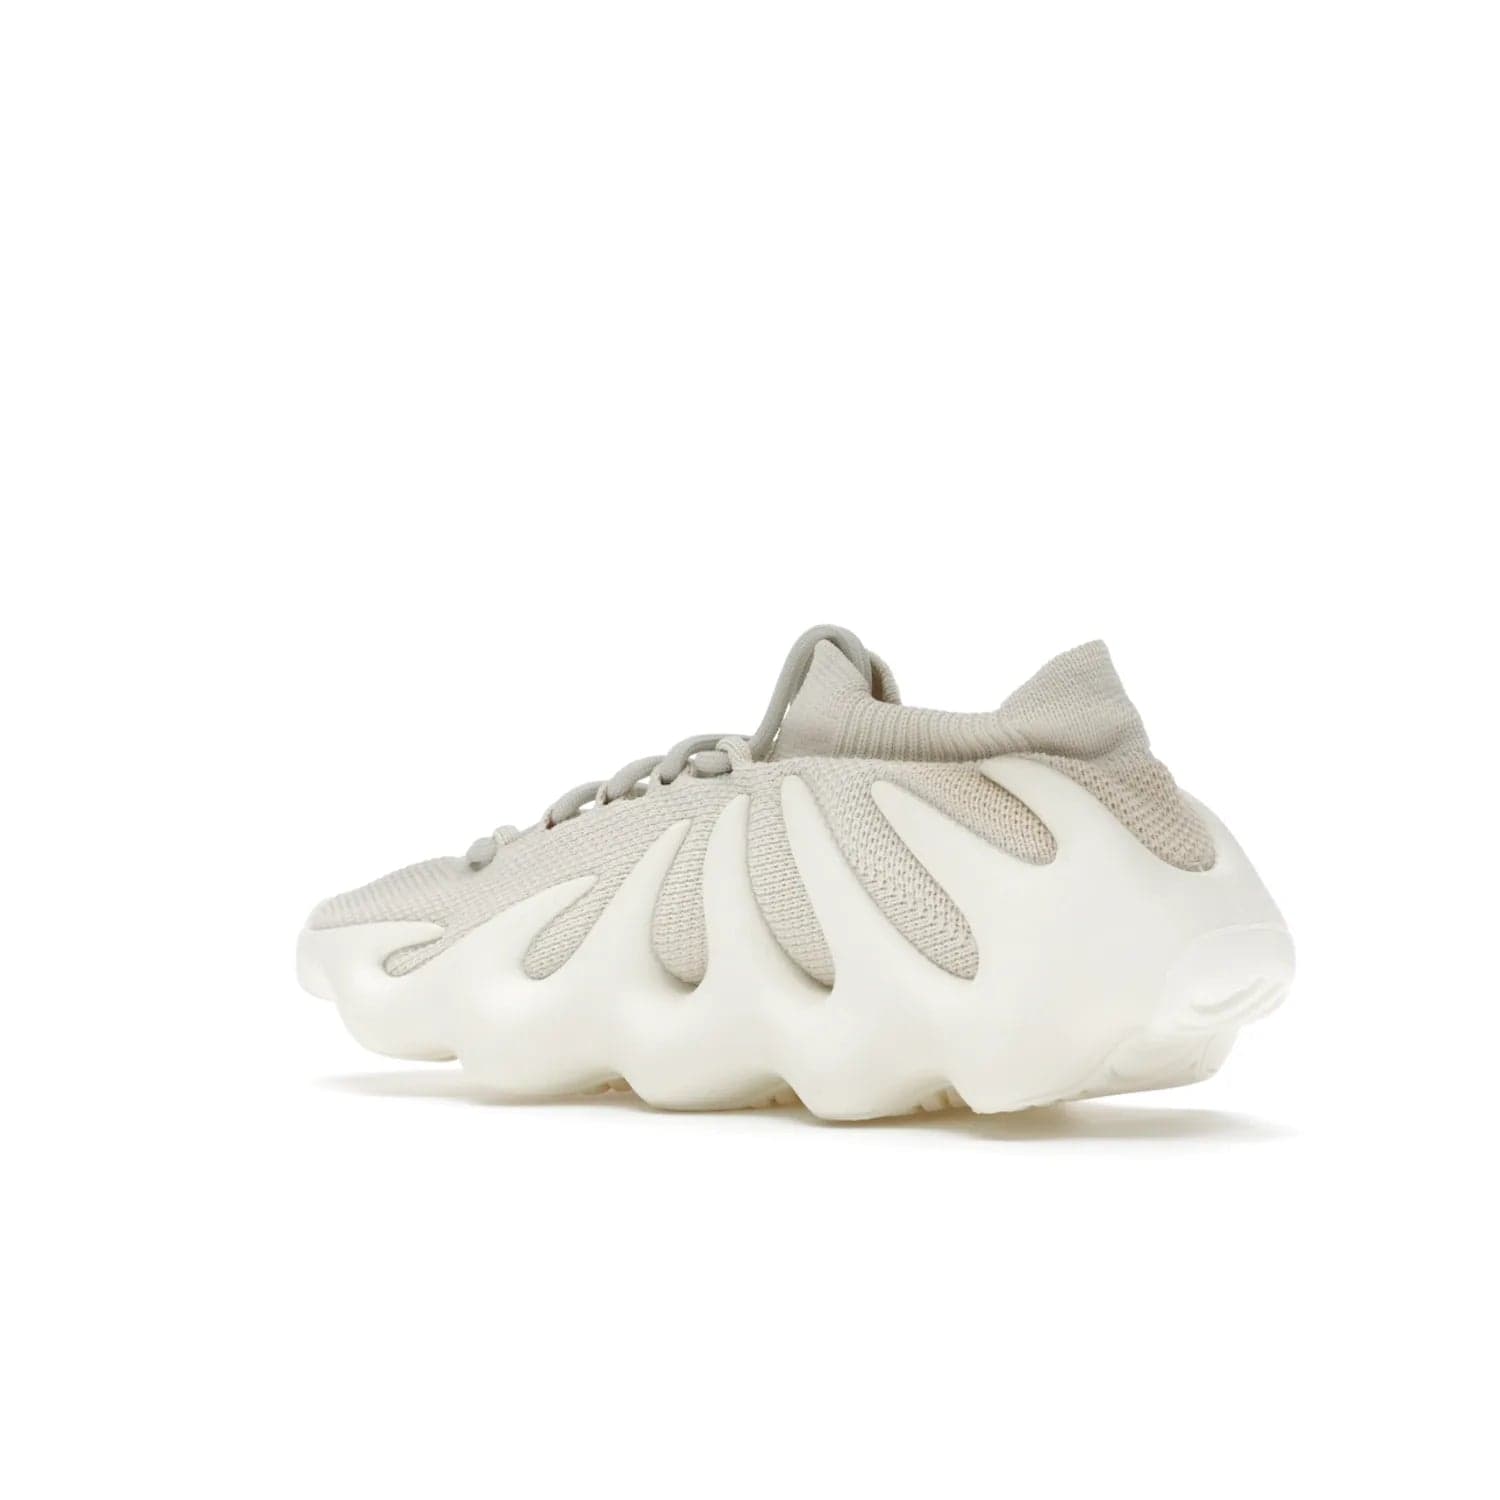 adidas Yeezy 450 Cloud White - Image 23 - Only at www.BallersClubKickz.com - Experience the future with the adidas Yeezy 450 Cloud White. A two-piece design featuring an extreme foam sole and mesh upper, this silhouette is expected to release in March 2021. Get your hands on this striking Cloud White/Cloud White colorway and stand out in the crowd.